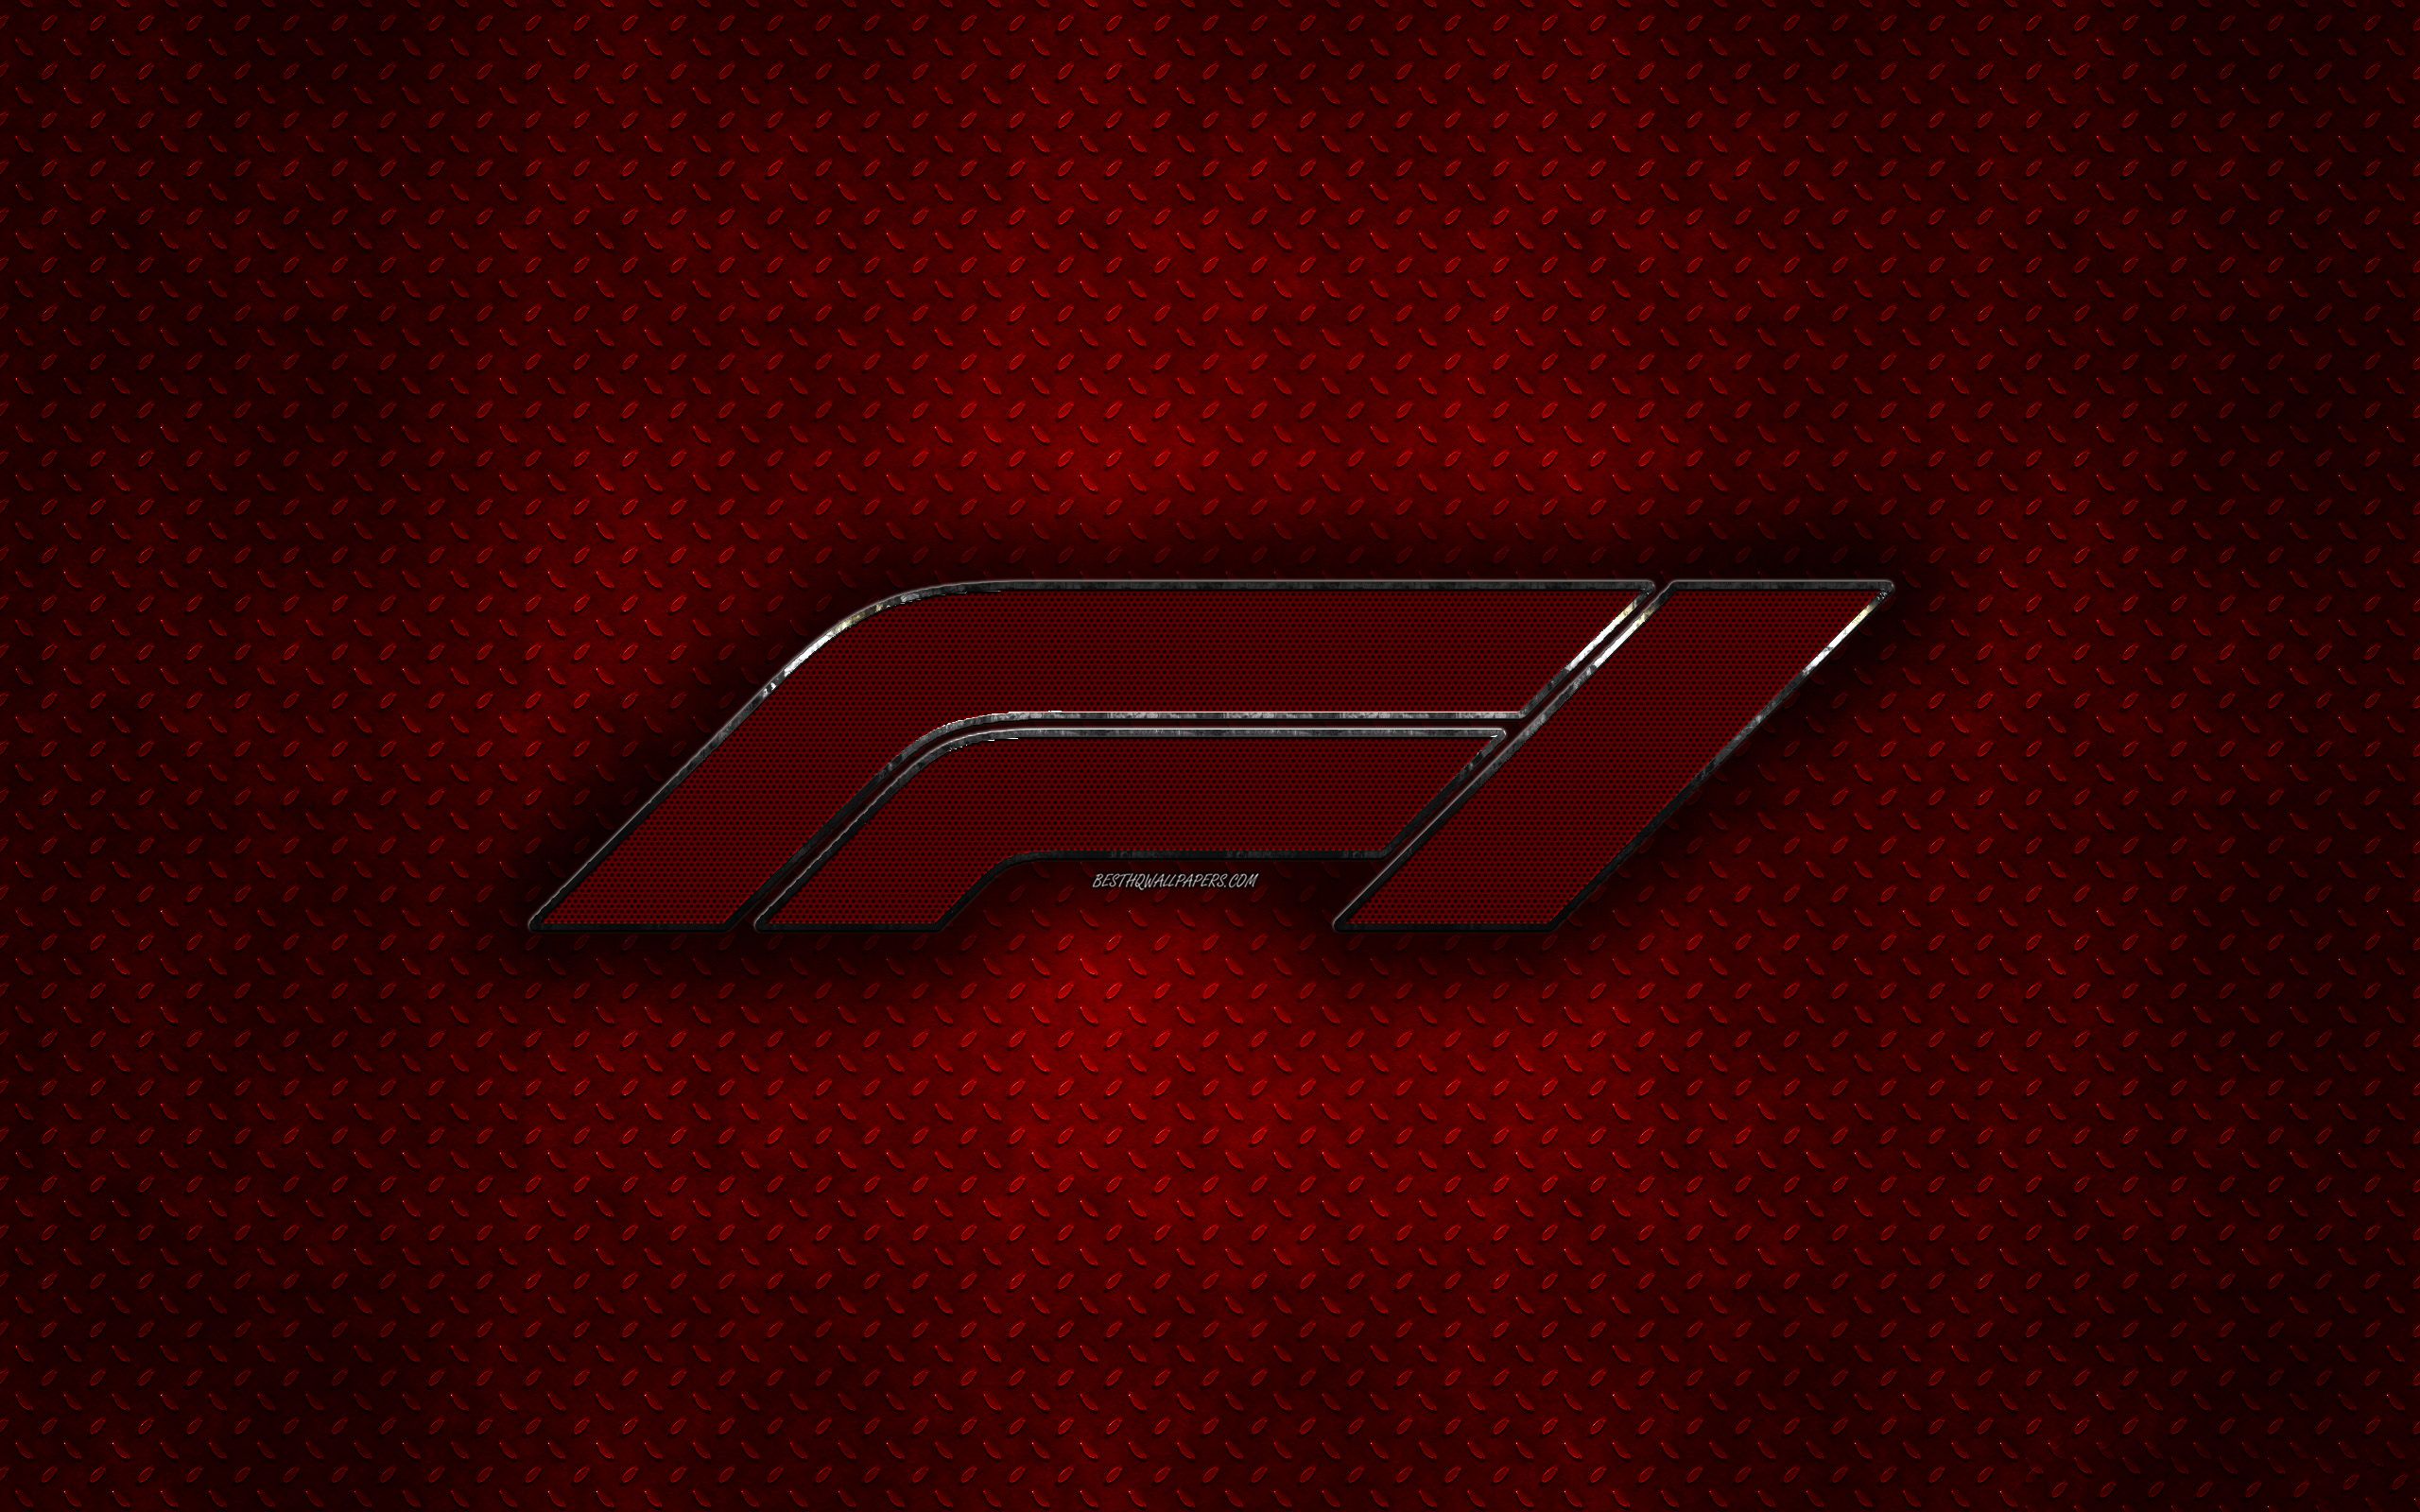 Download wallpaper Formula new logo, red metal texture, F1 metal red emblem, creative art for desktop with resolution 2560x1600. High Quality HD picture wallpaper